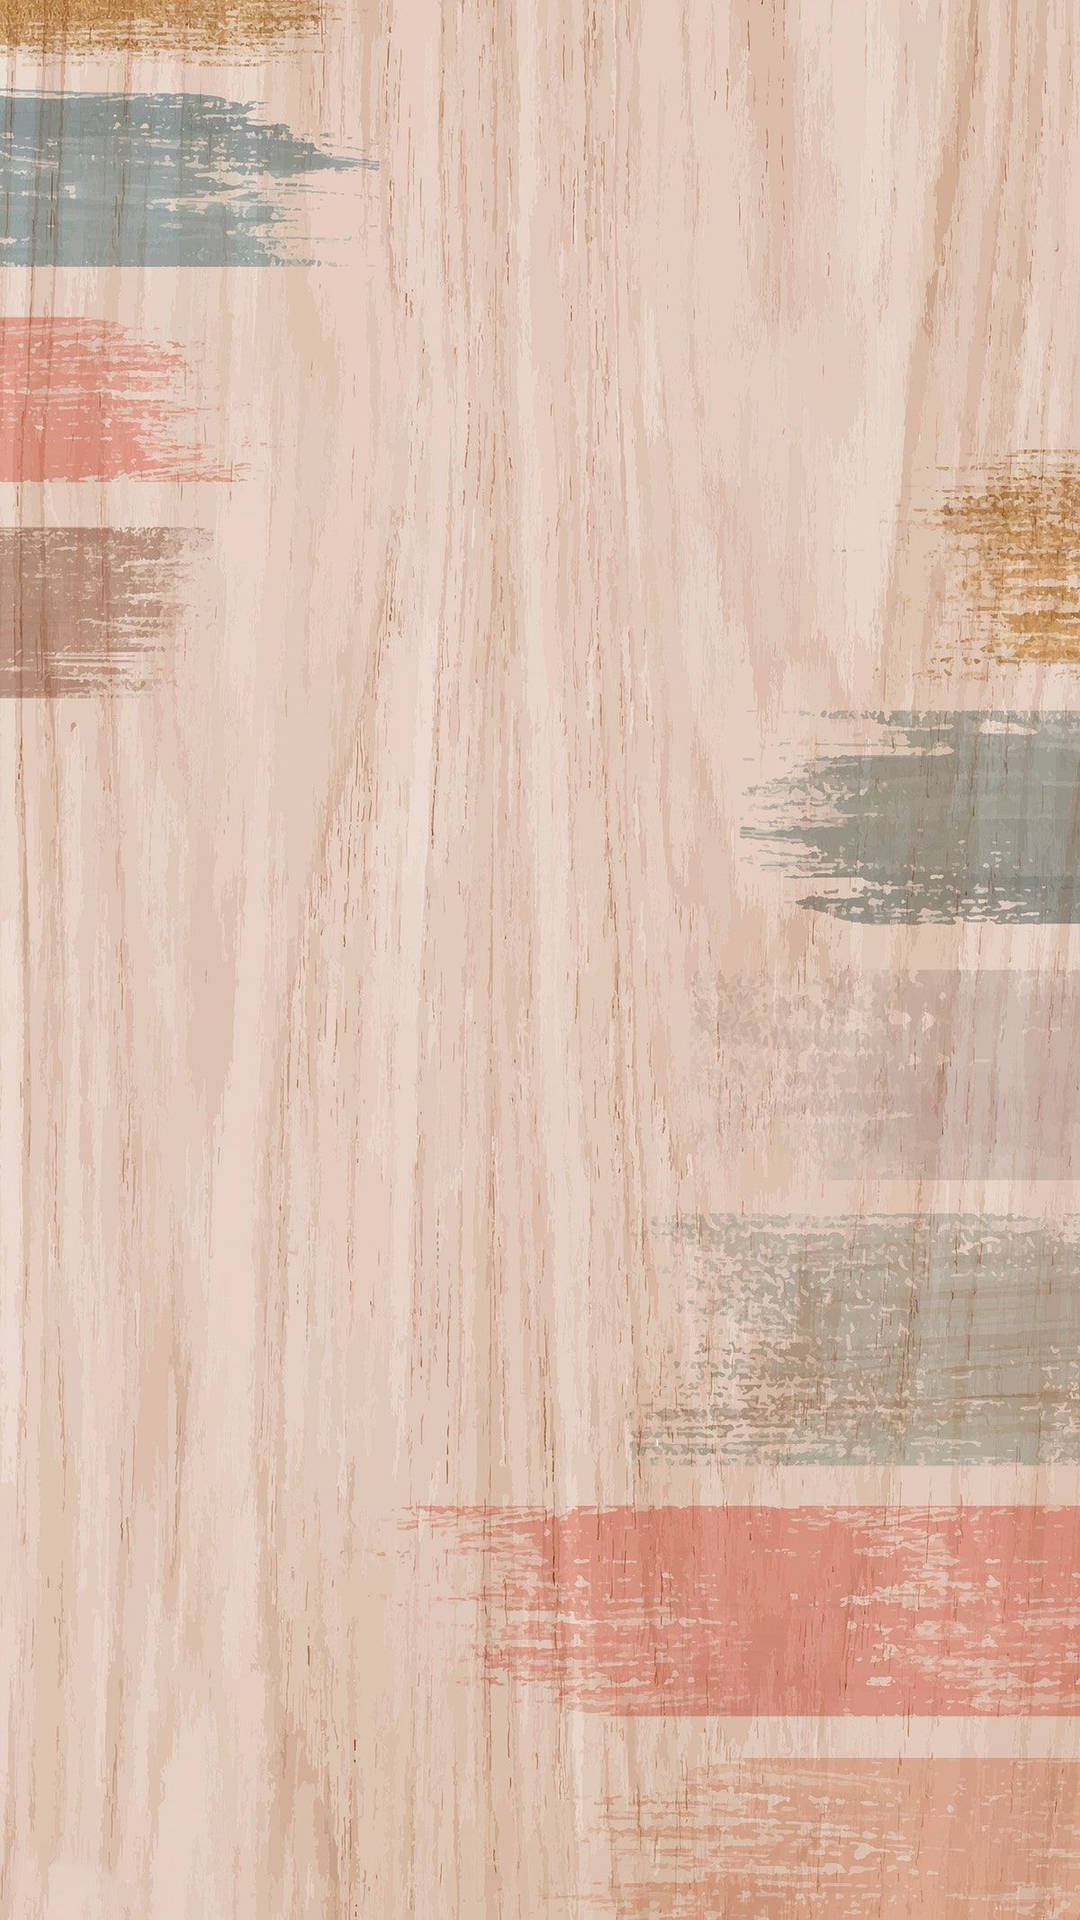 Charming and nostalgic, this vintage pastel masterpiece is sure to invigorate and mesmerize. Wallpaper